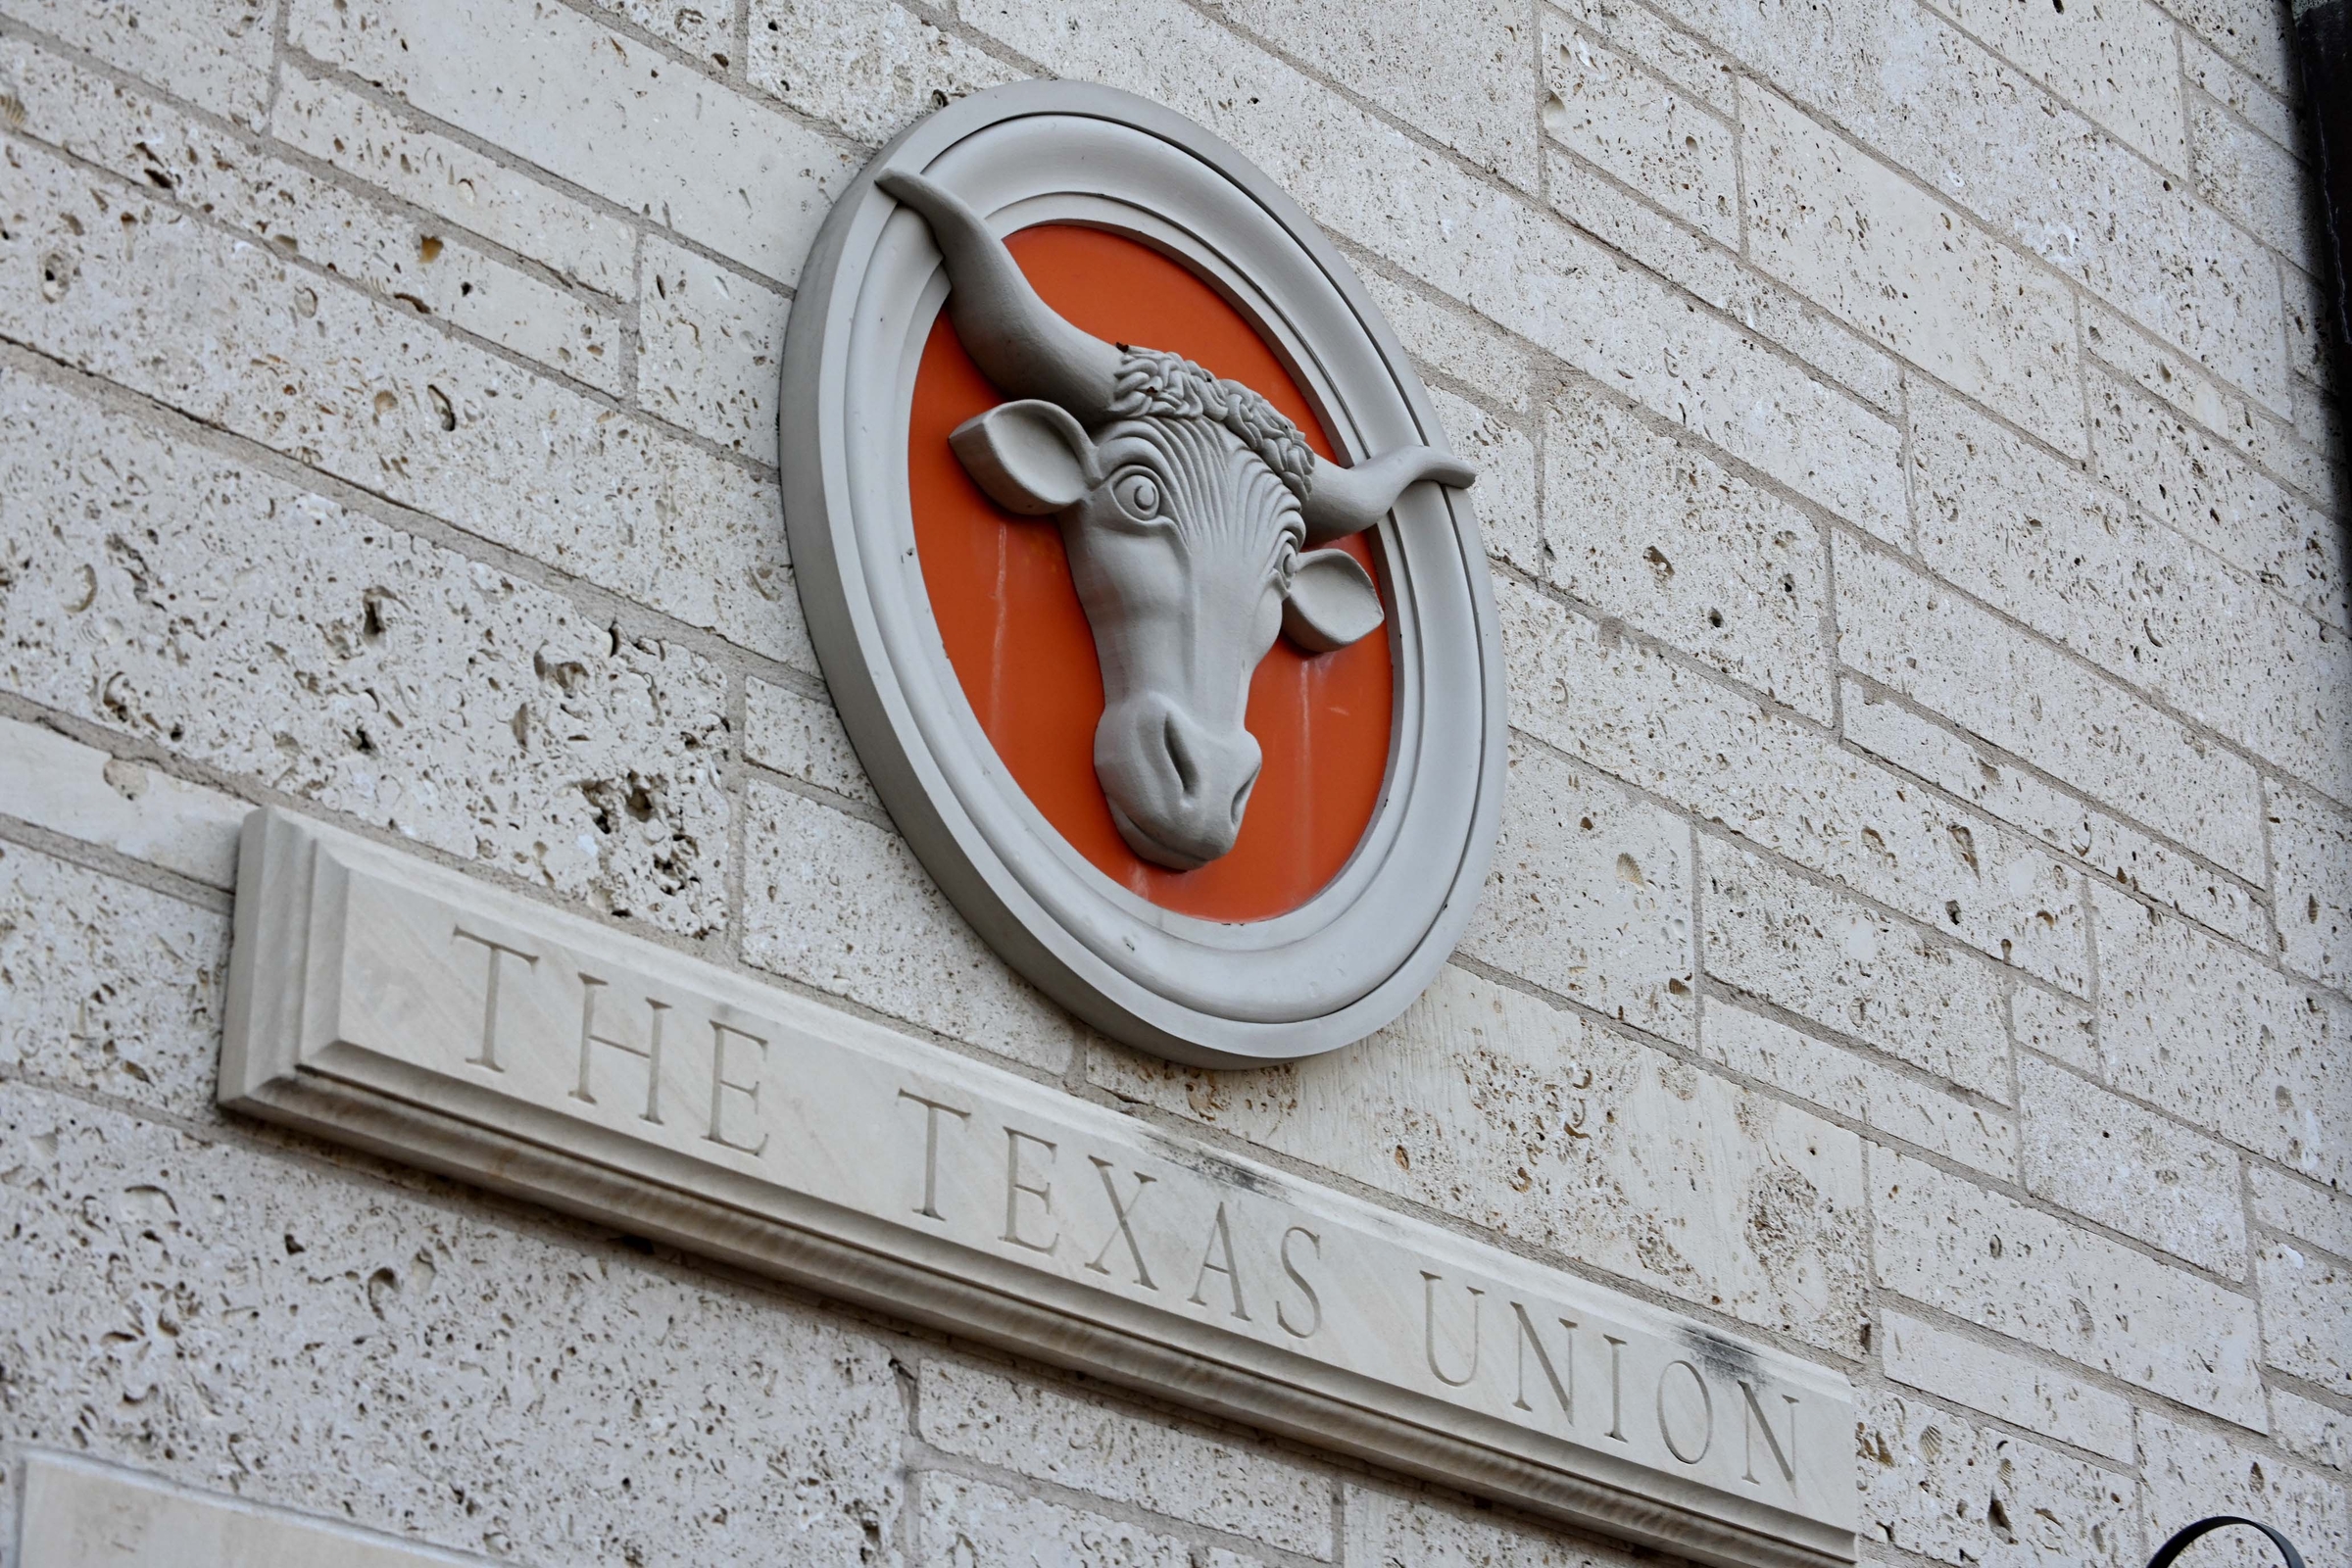 An image of a Texas Longhorn appears in a circle on a limestone wall above the words The Texas Union